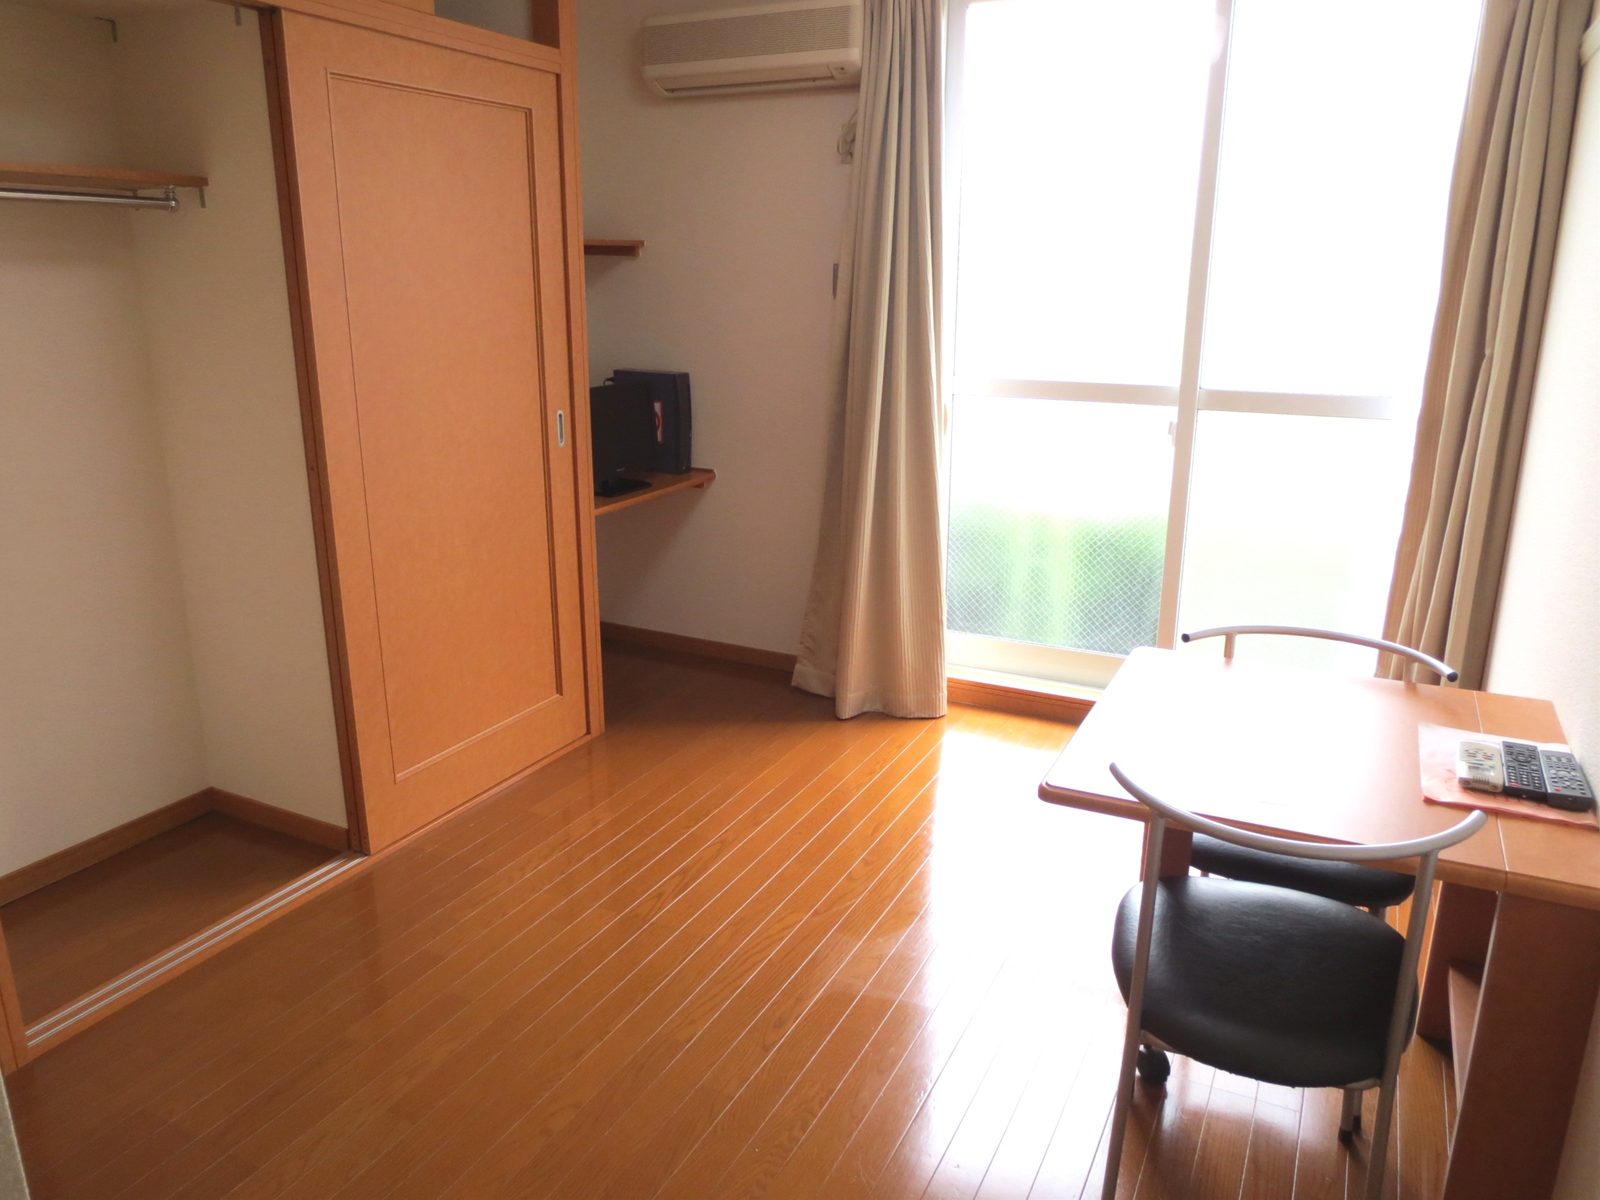 Living and room. tv set ・ Air conditioning ・ It comes with a curtain ※ Specifications are different in the room